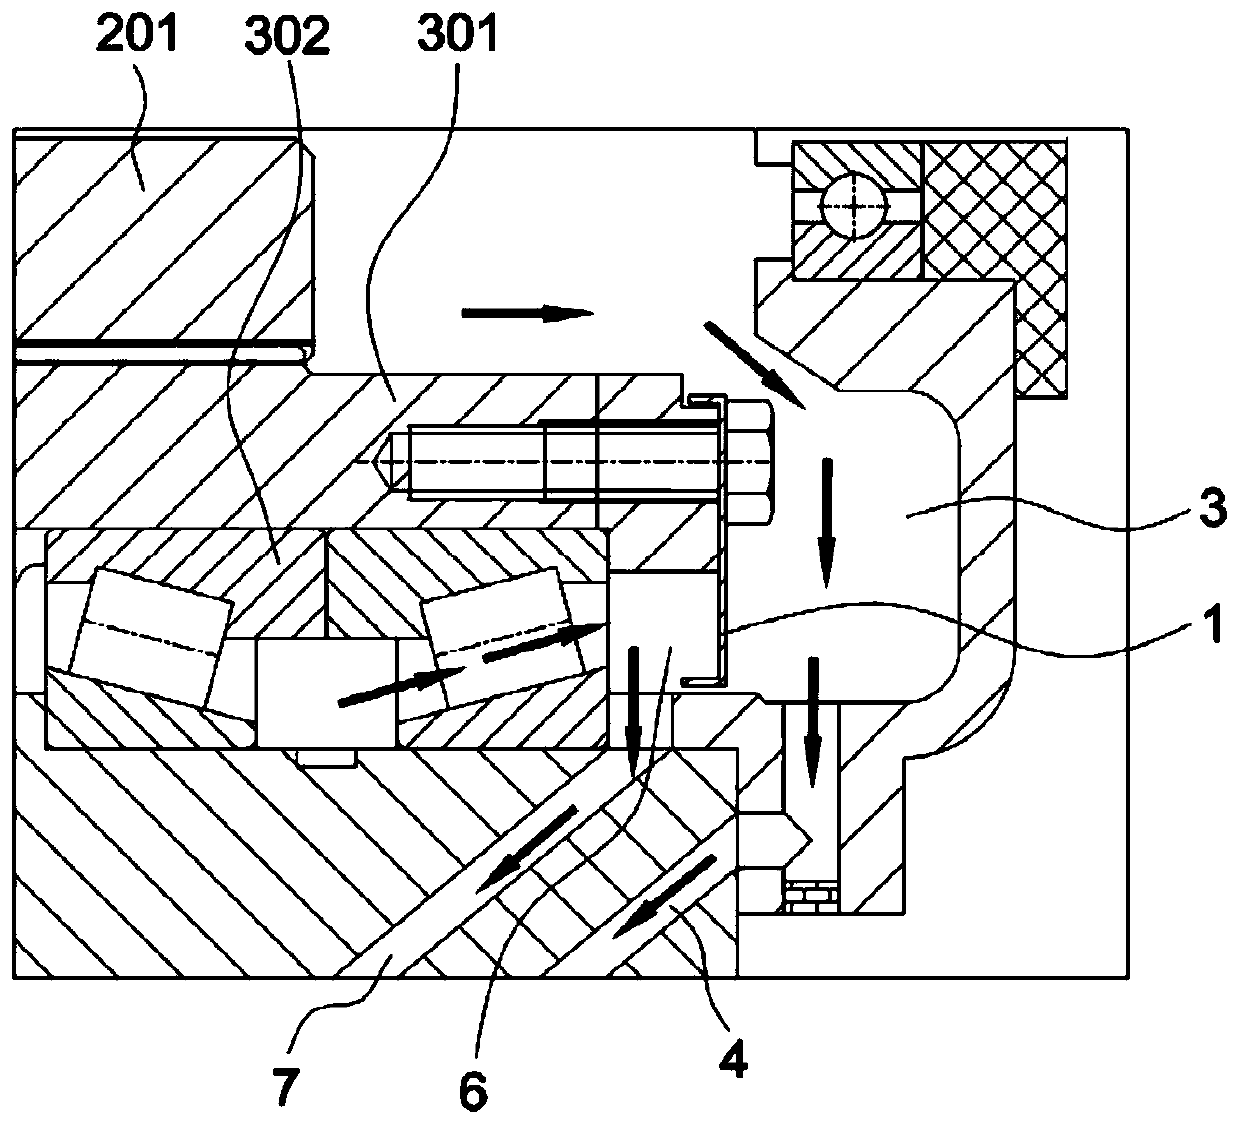 Bearing protection structure and wind power gearbox